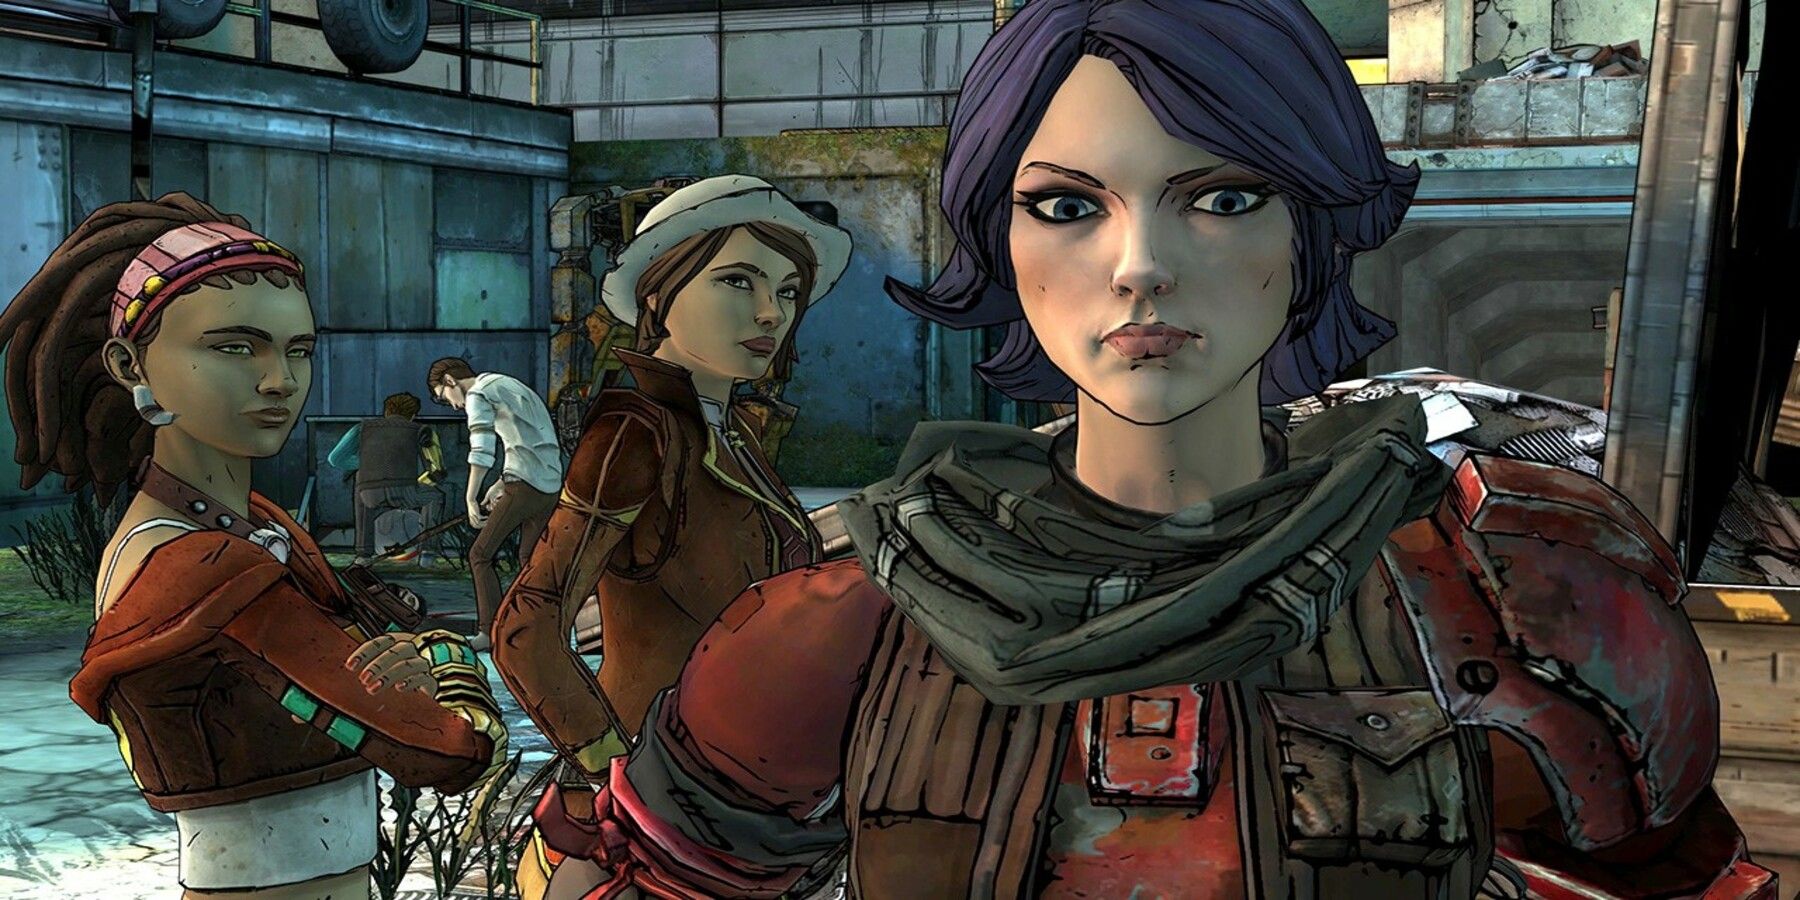 tales-from-the-borderlands-athena-design